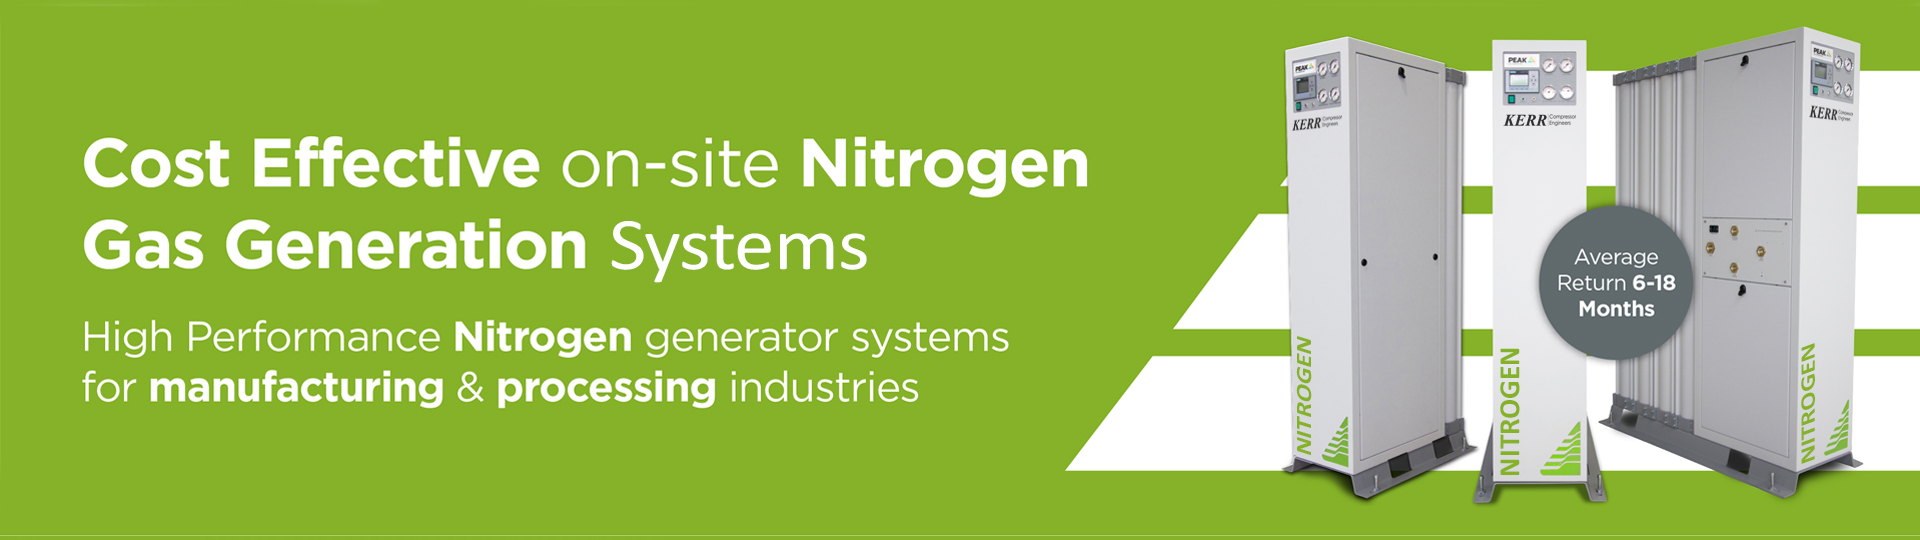 Cost-effective on-site Nitrogen Generator Systems